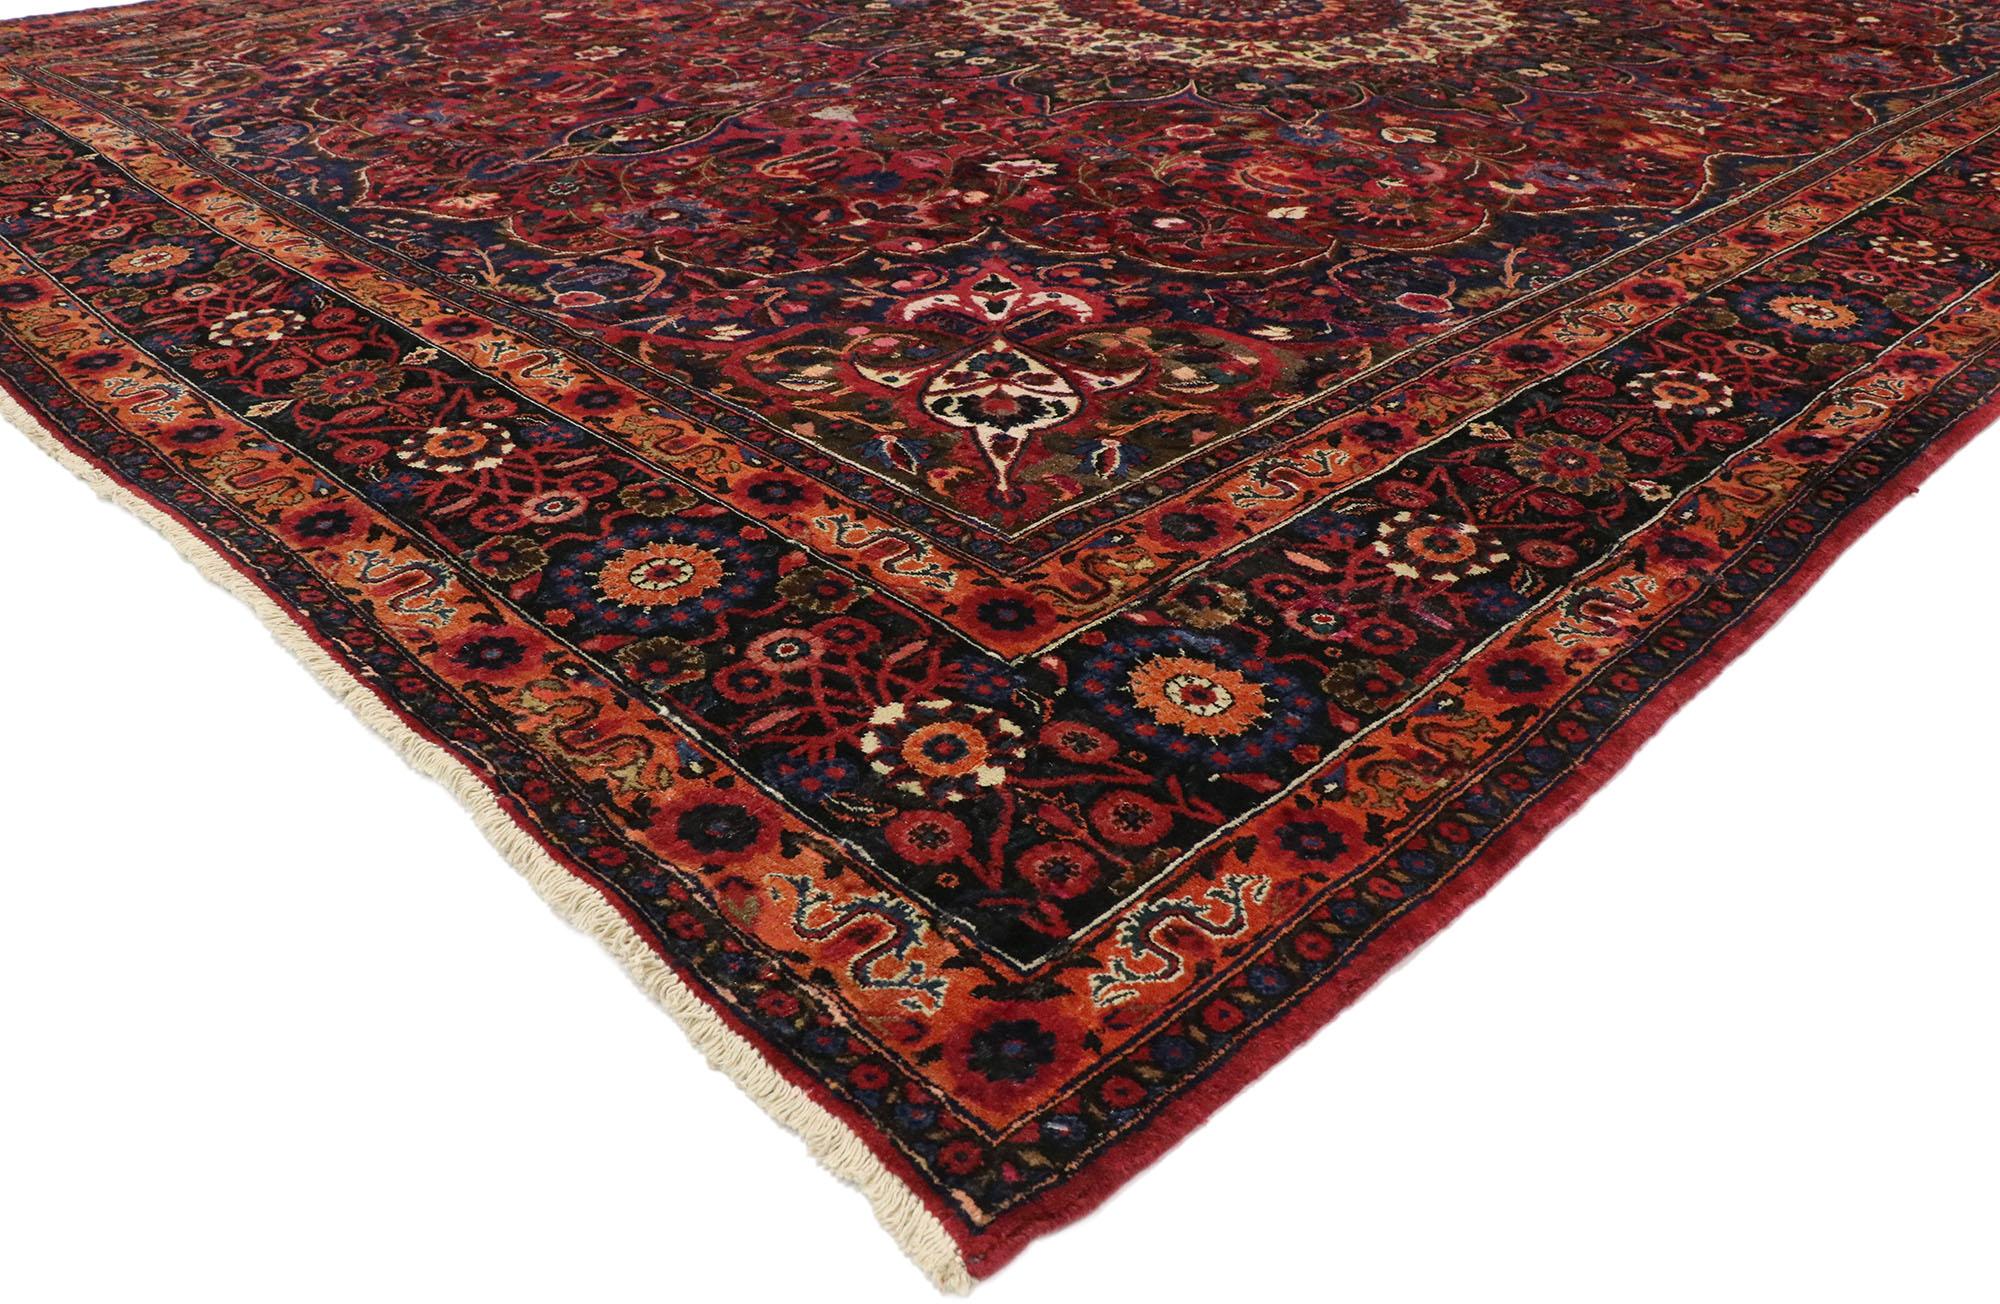 75668, vintage Persian Mashhad Area rug with Luxe Victorian style. This hand knotted wool vintage Persian Mashhad rug features a round 16-point Mashhad medallion flanked by palmette finials at each end floating among bouquets of blooming flowers.